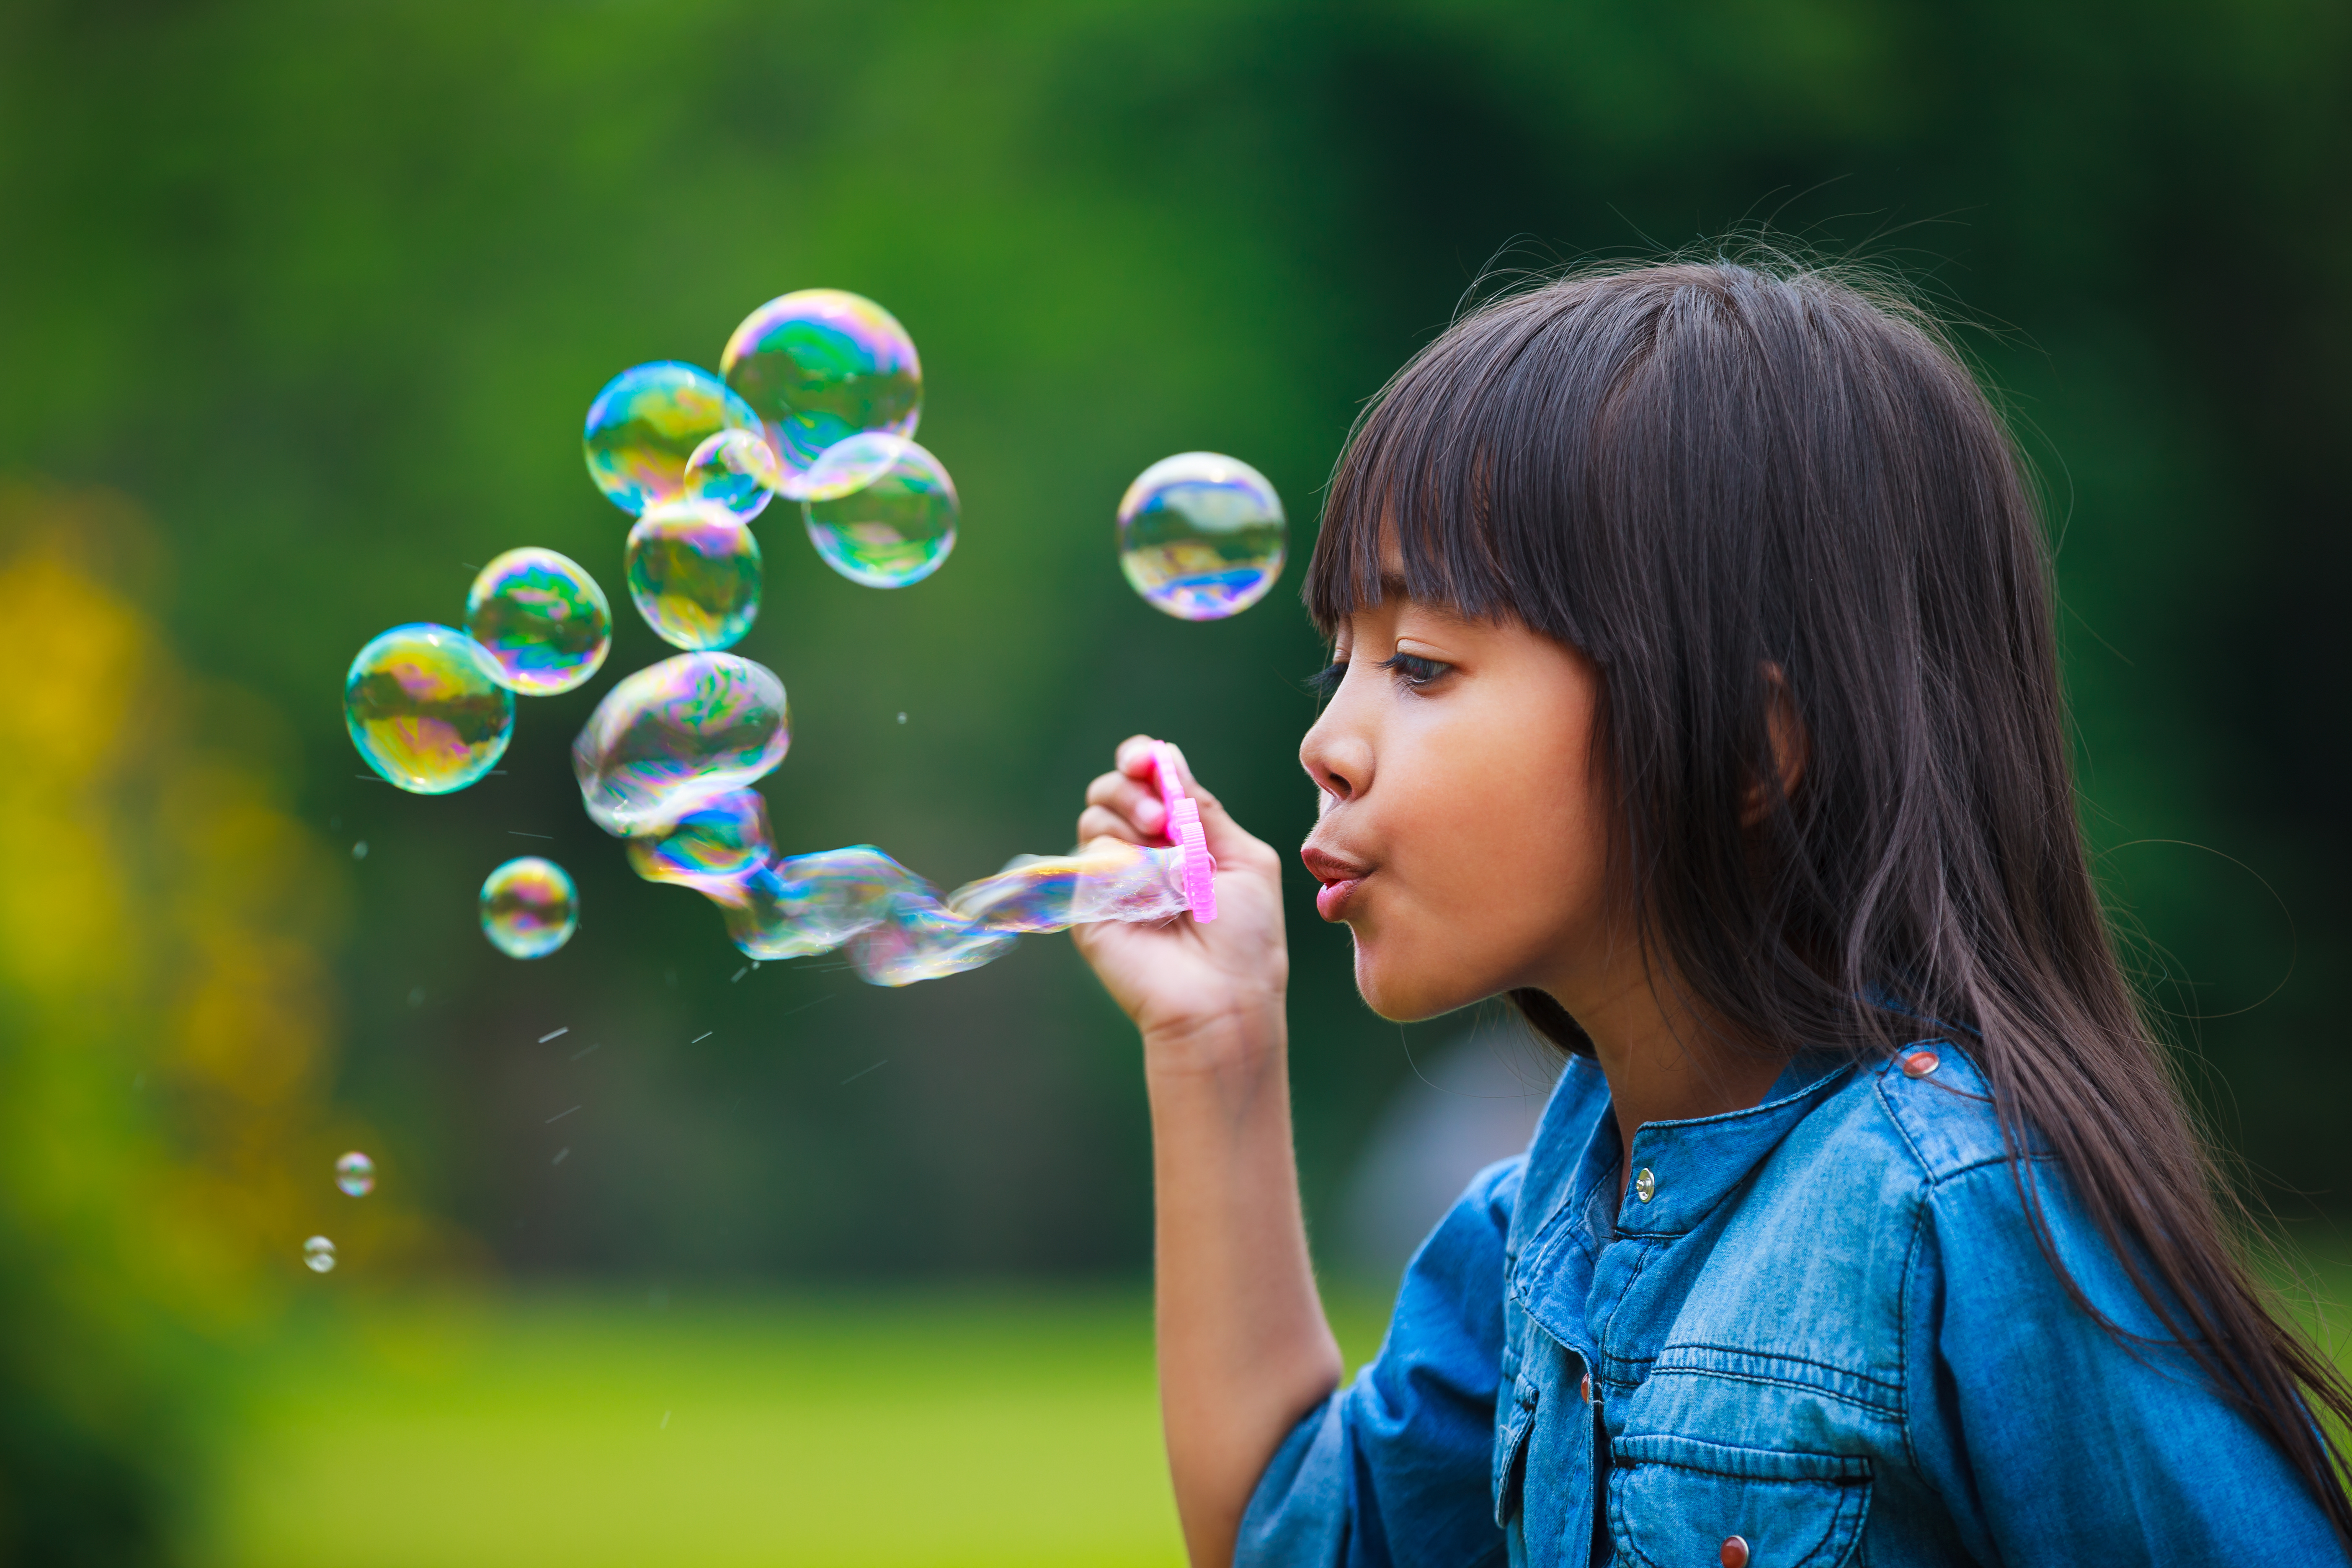 Girl blowing bubbles